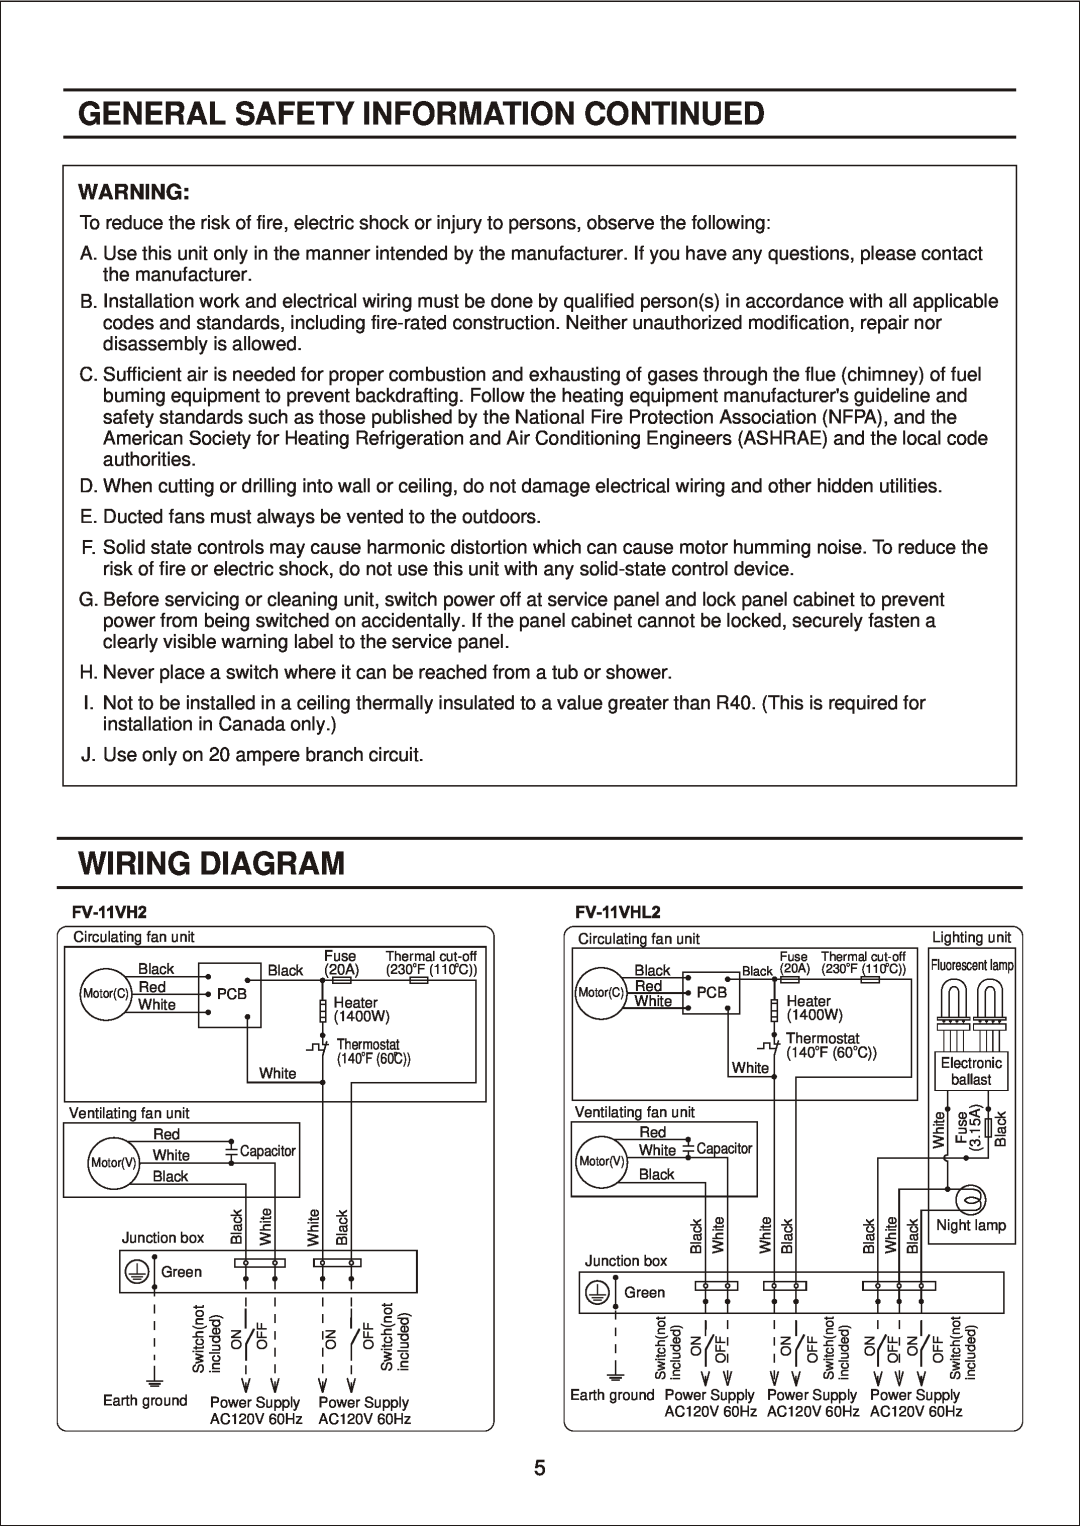 Panasonic FV-11VH2 manual General Safety Information Continued, Wiring Diagram 